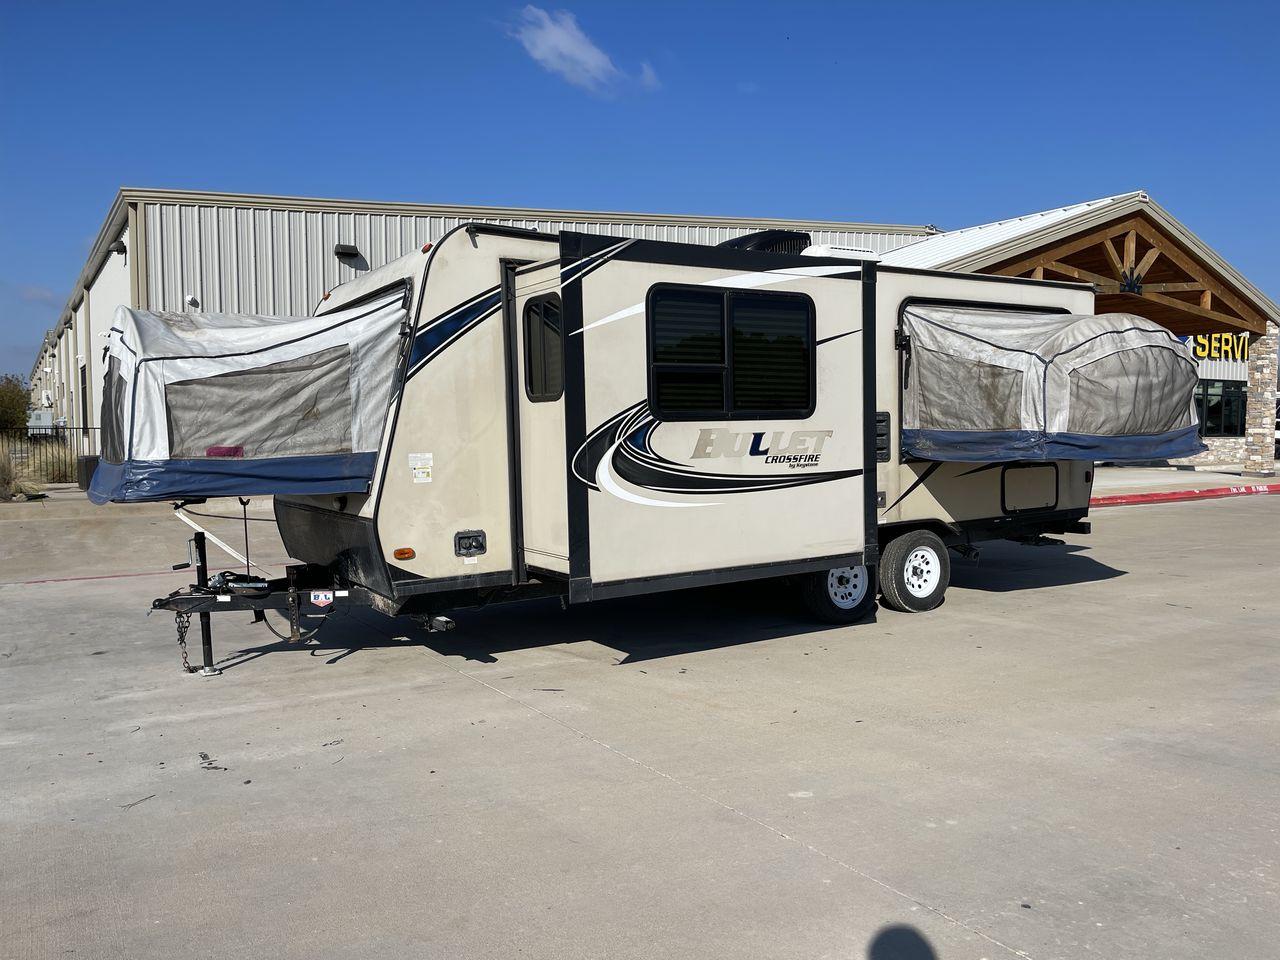 2018 BULLET CROSSFIRE 2190EX (4YDT21923JT) , Length: 25.08 ft. | Dry Weight: 4,410 lbs. | Gross Weight: 6,300 lbs. | Slides: 1 transmission, located at 4319 N Main Street, Cleburne, TX, 76033, (817) 221-0660, 32.435829, -97.384178 - Photo #24